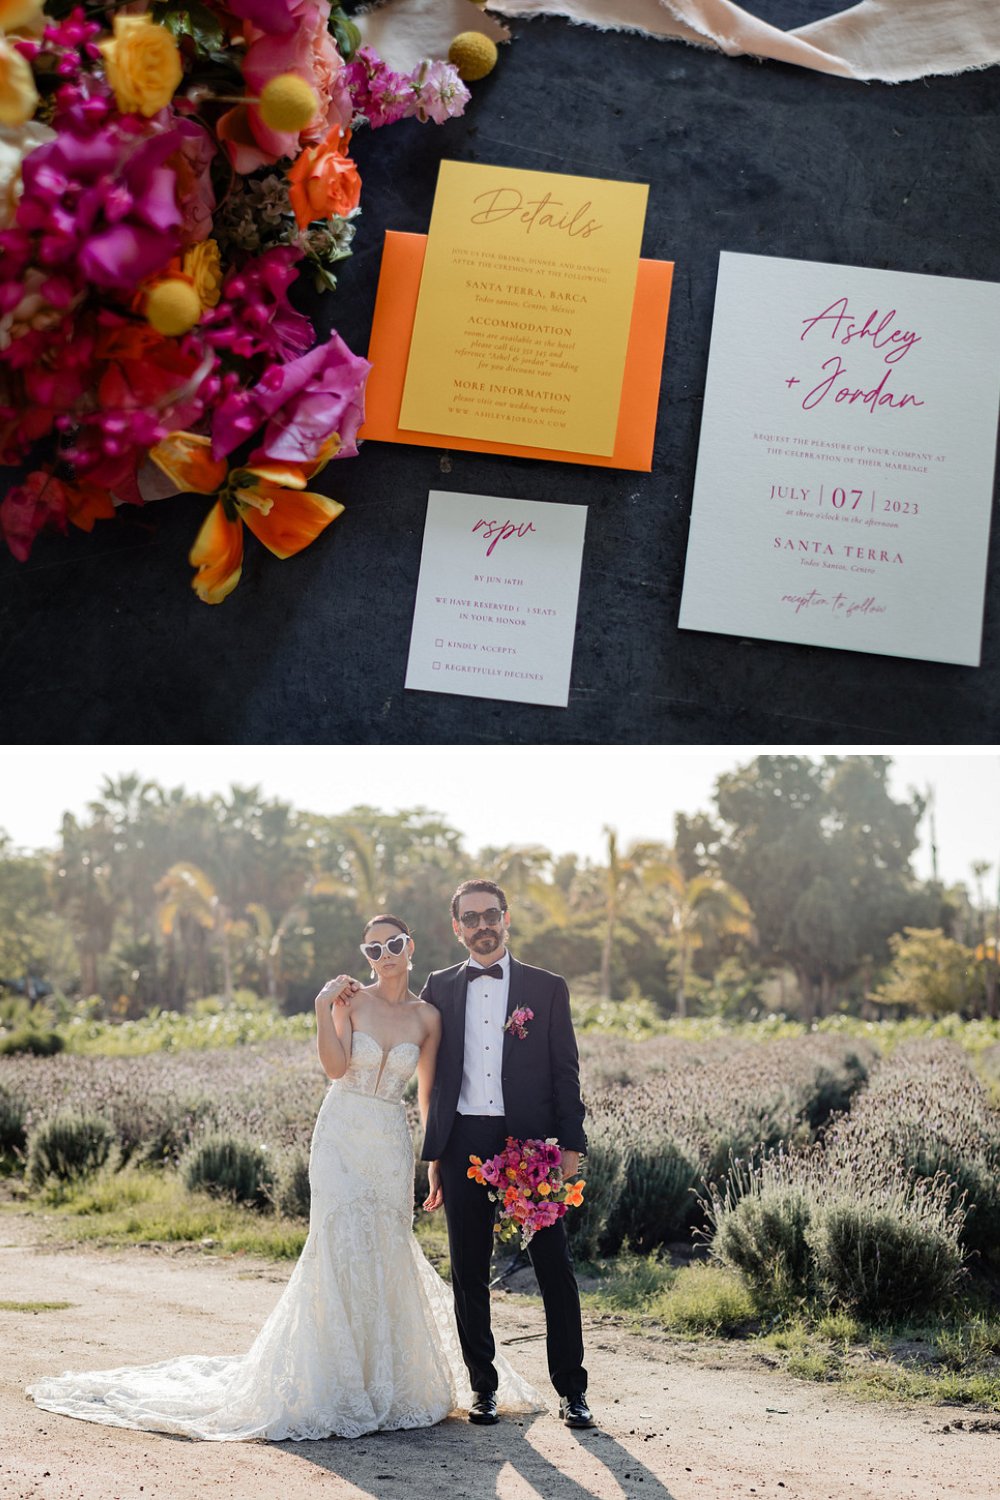 Collage of wedding invitations and a bride and groom posing for pictures